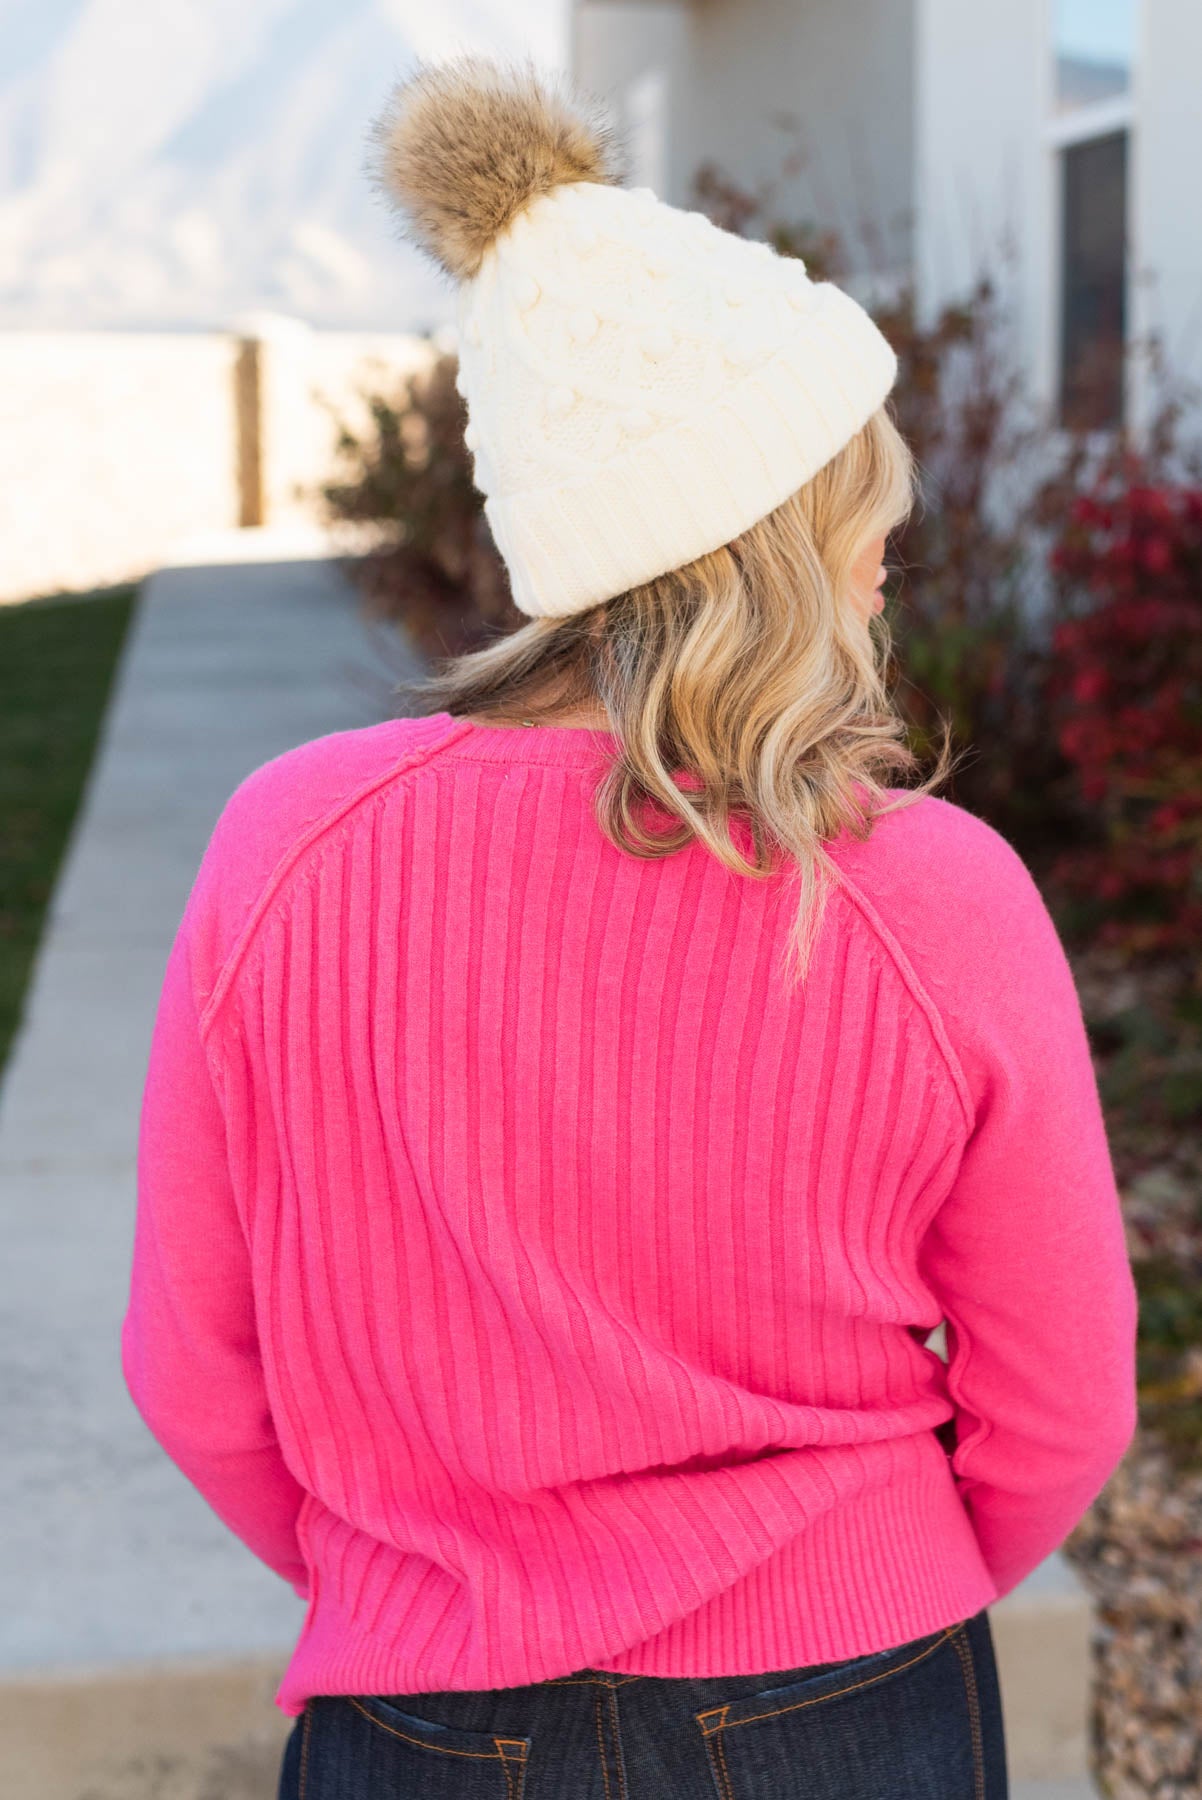 Back view of a hot pink sweater